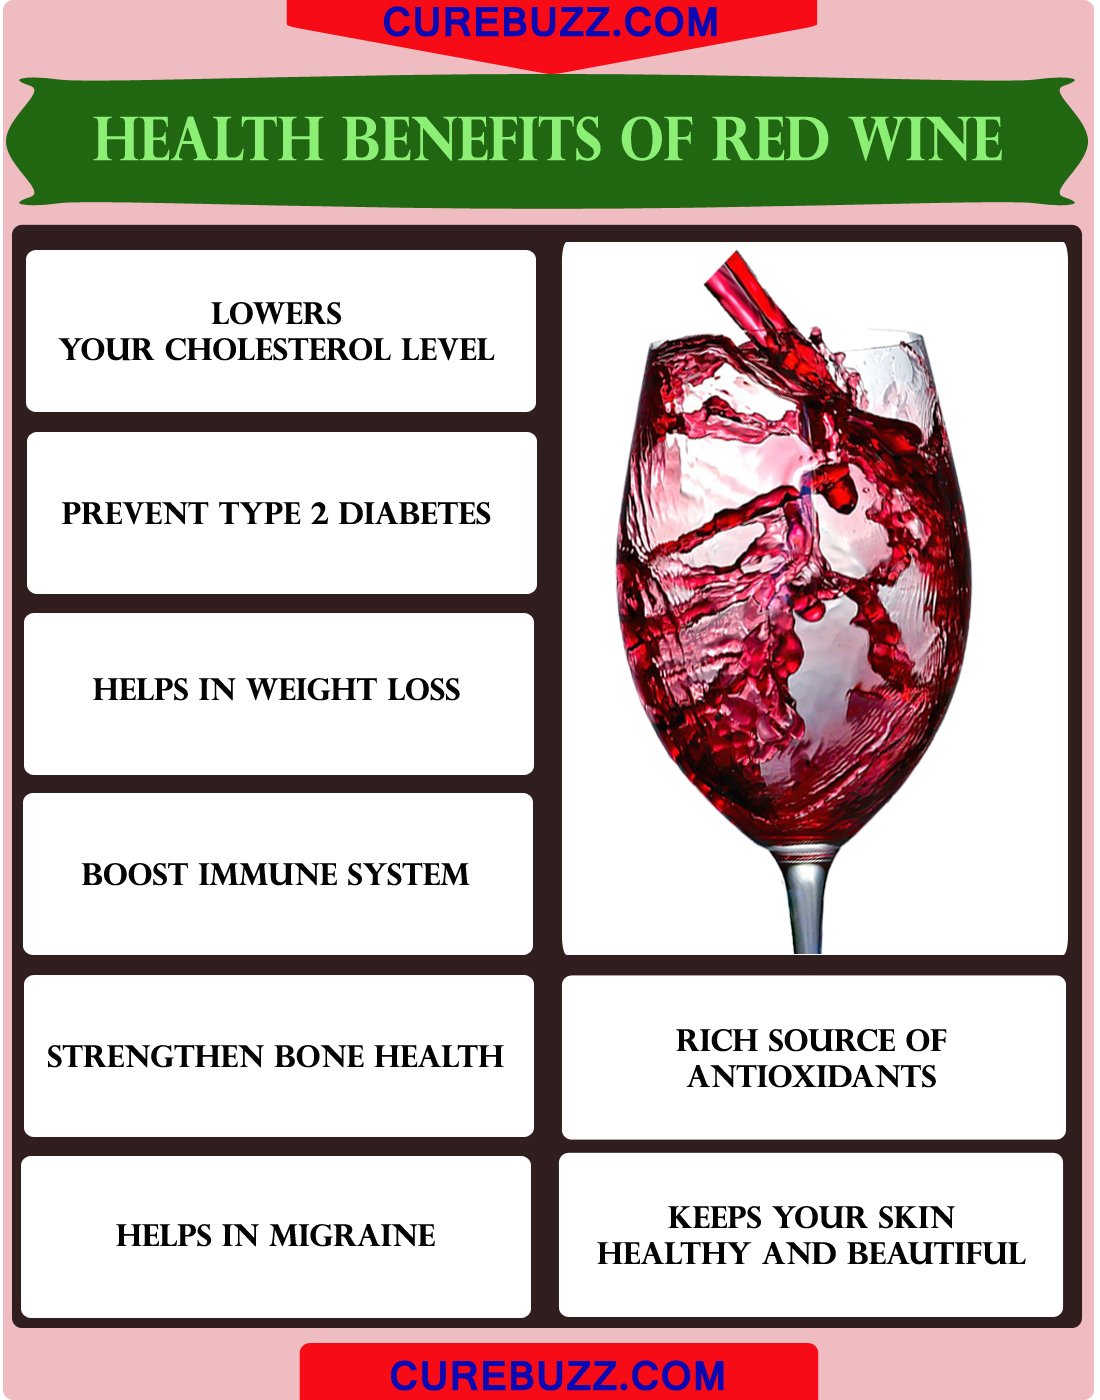 8 Health Benefits of Red Wine : CUREBUZZ